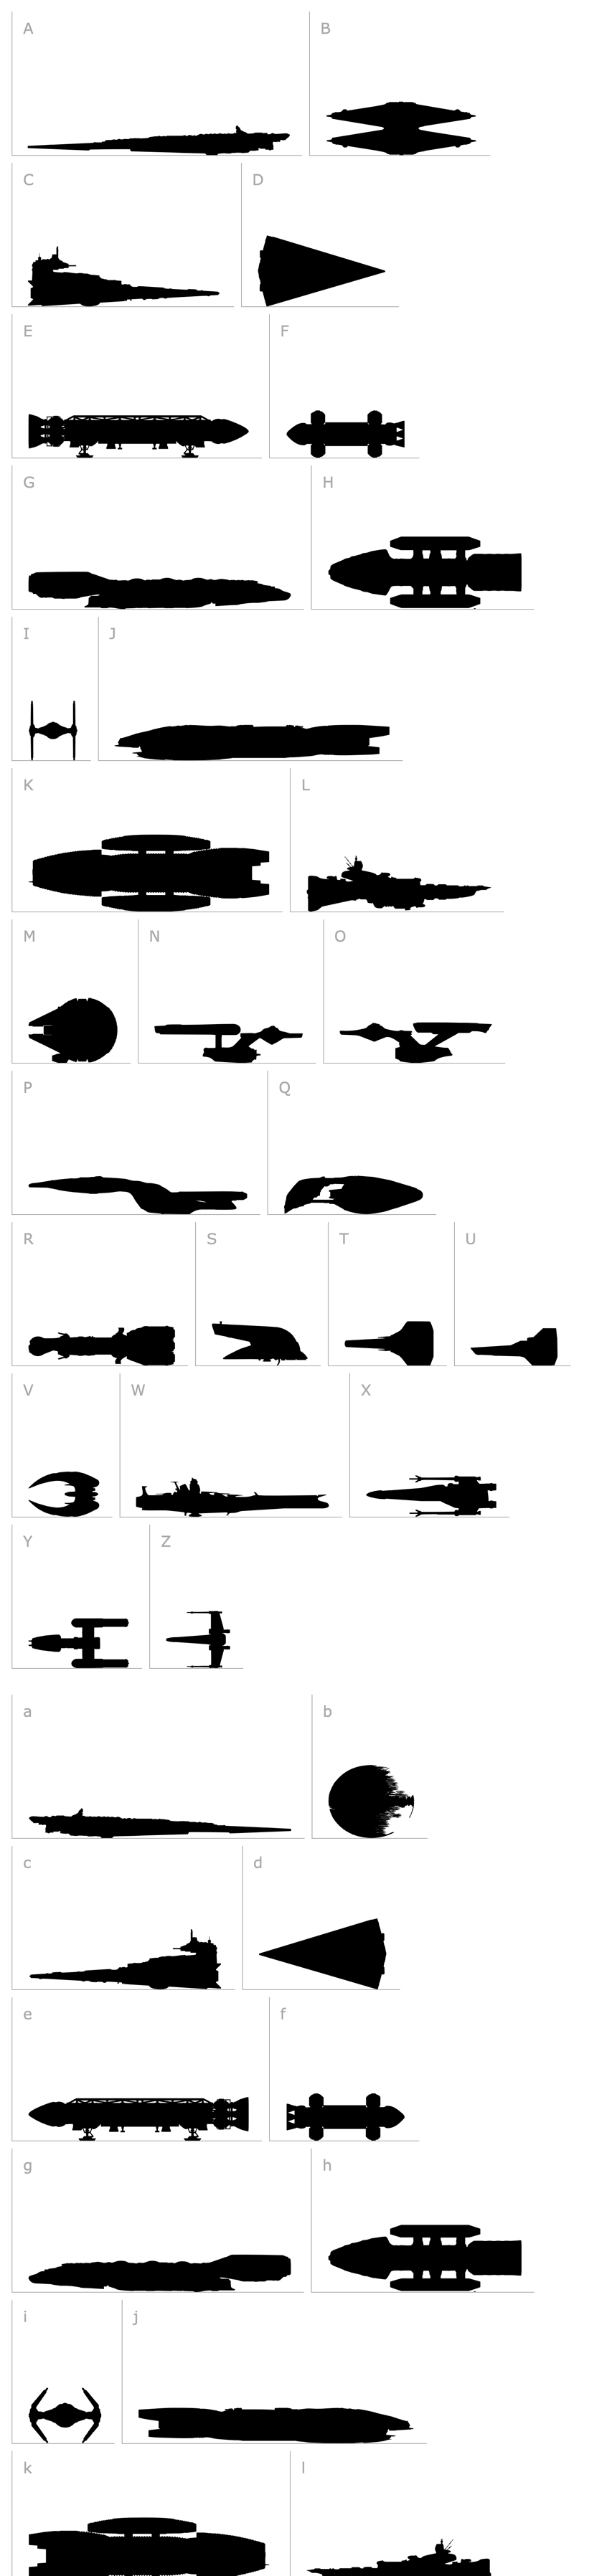 Overview Famous Spaceships